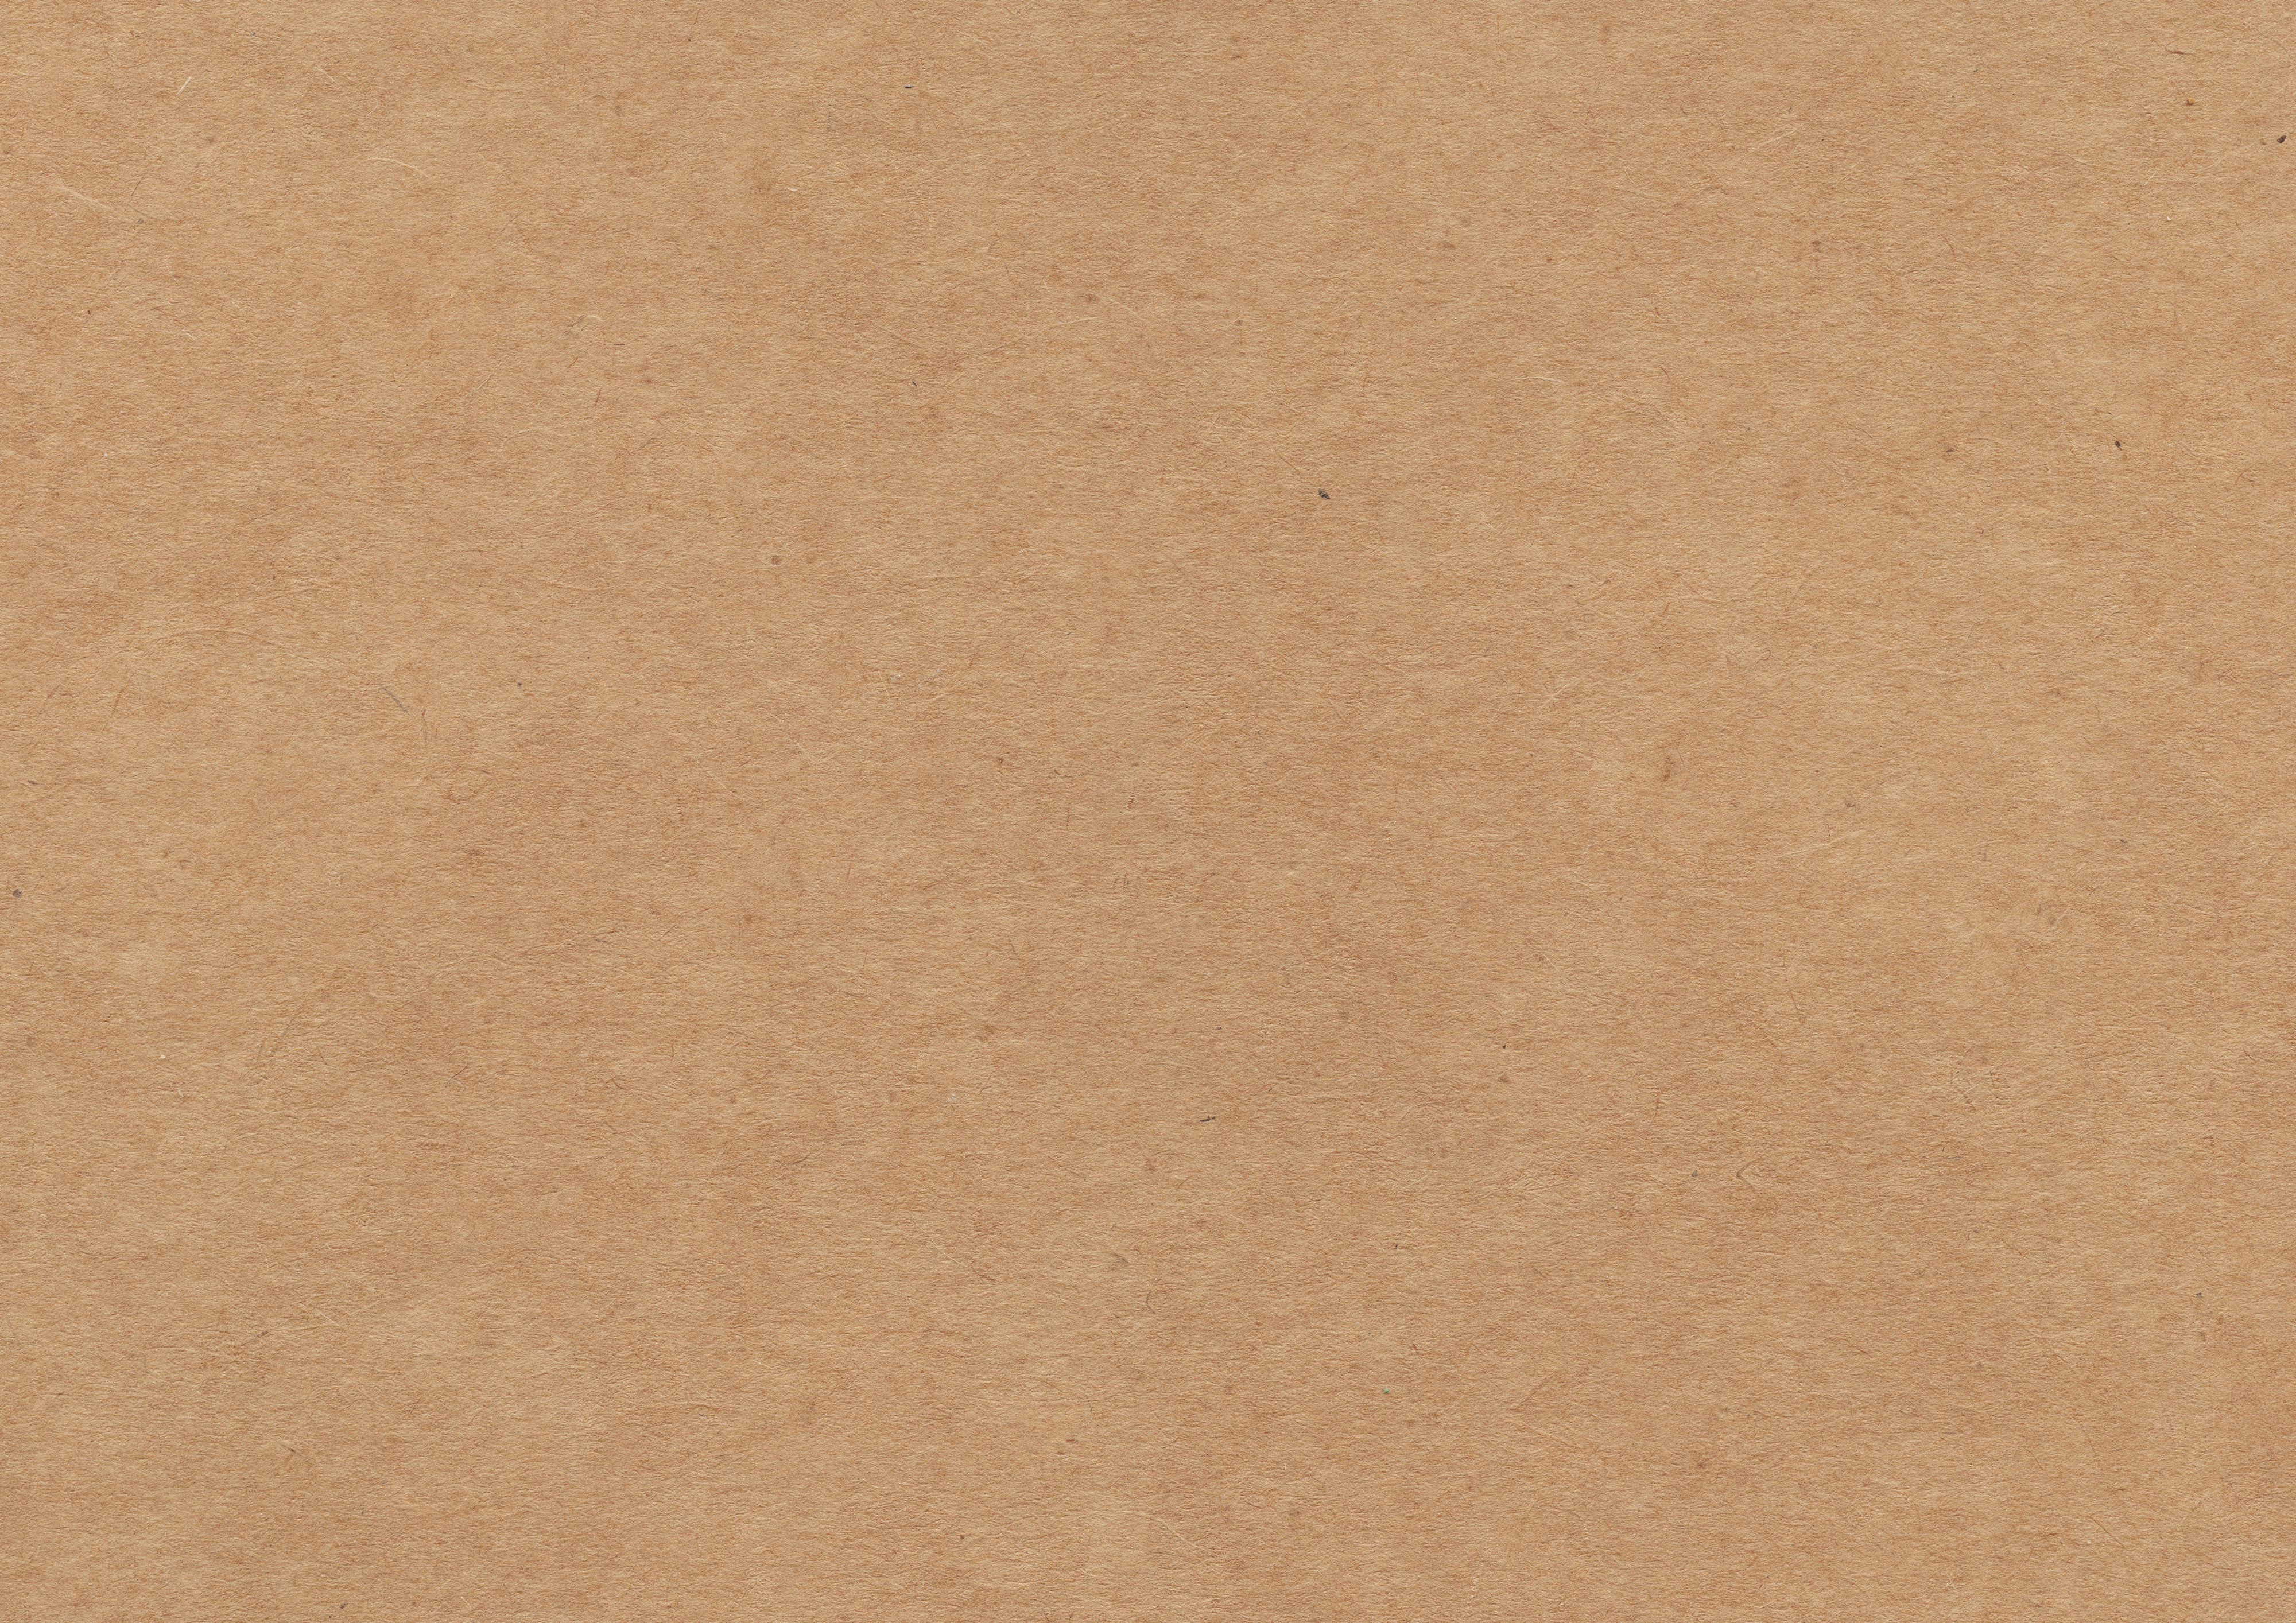 8 Kraft And Recycled Paper Textures Vol1